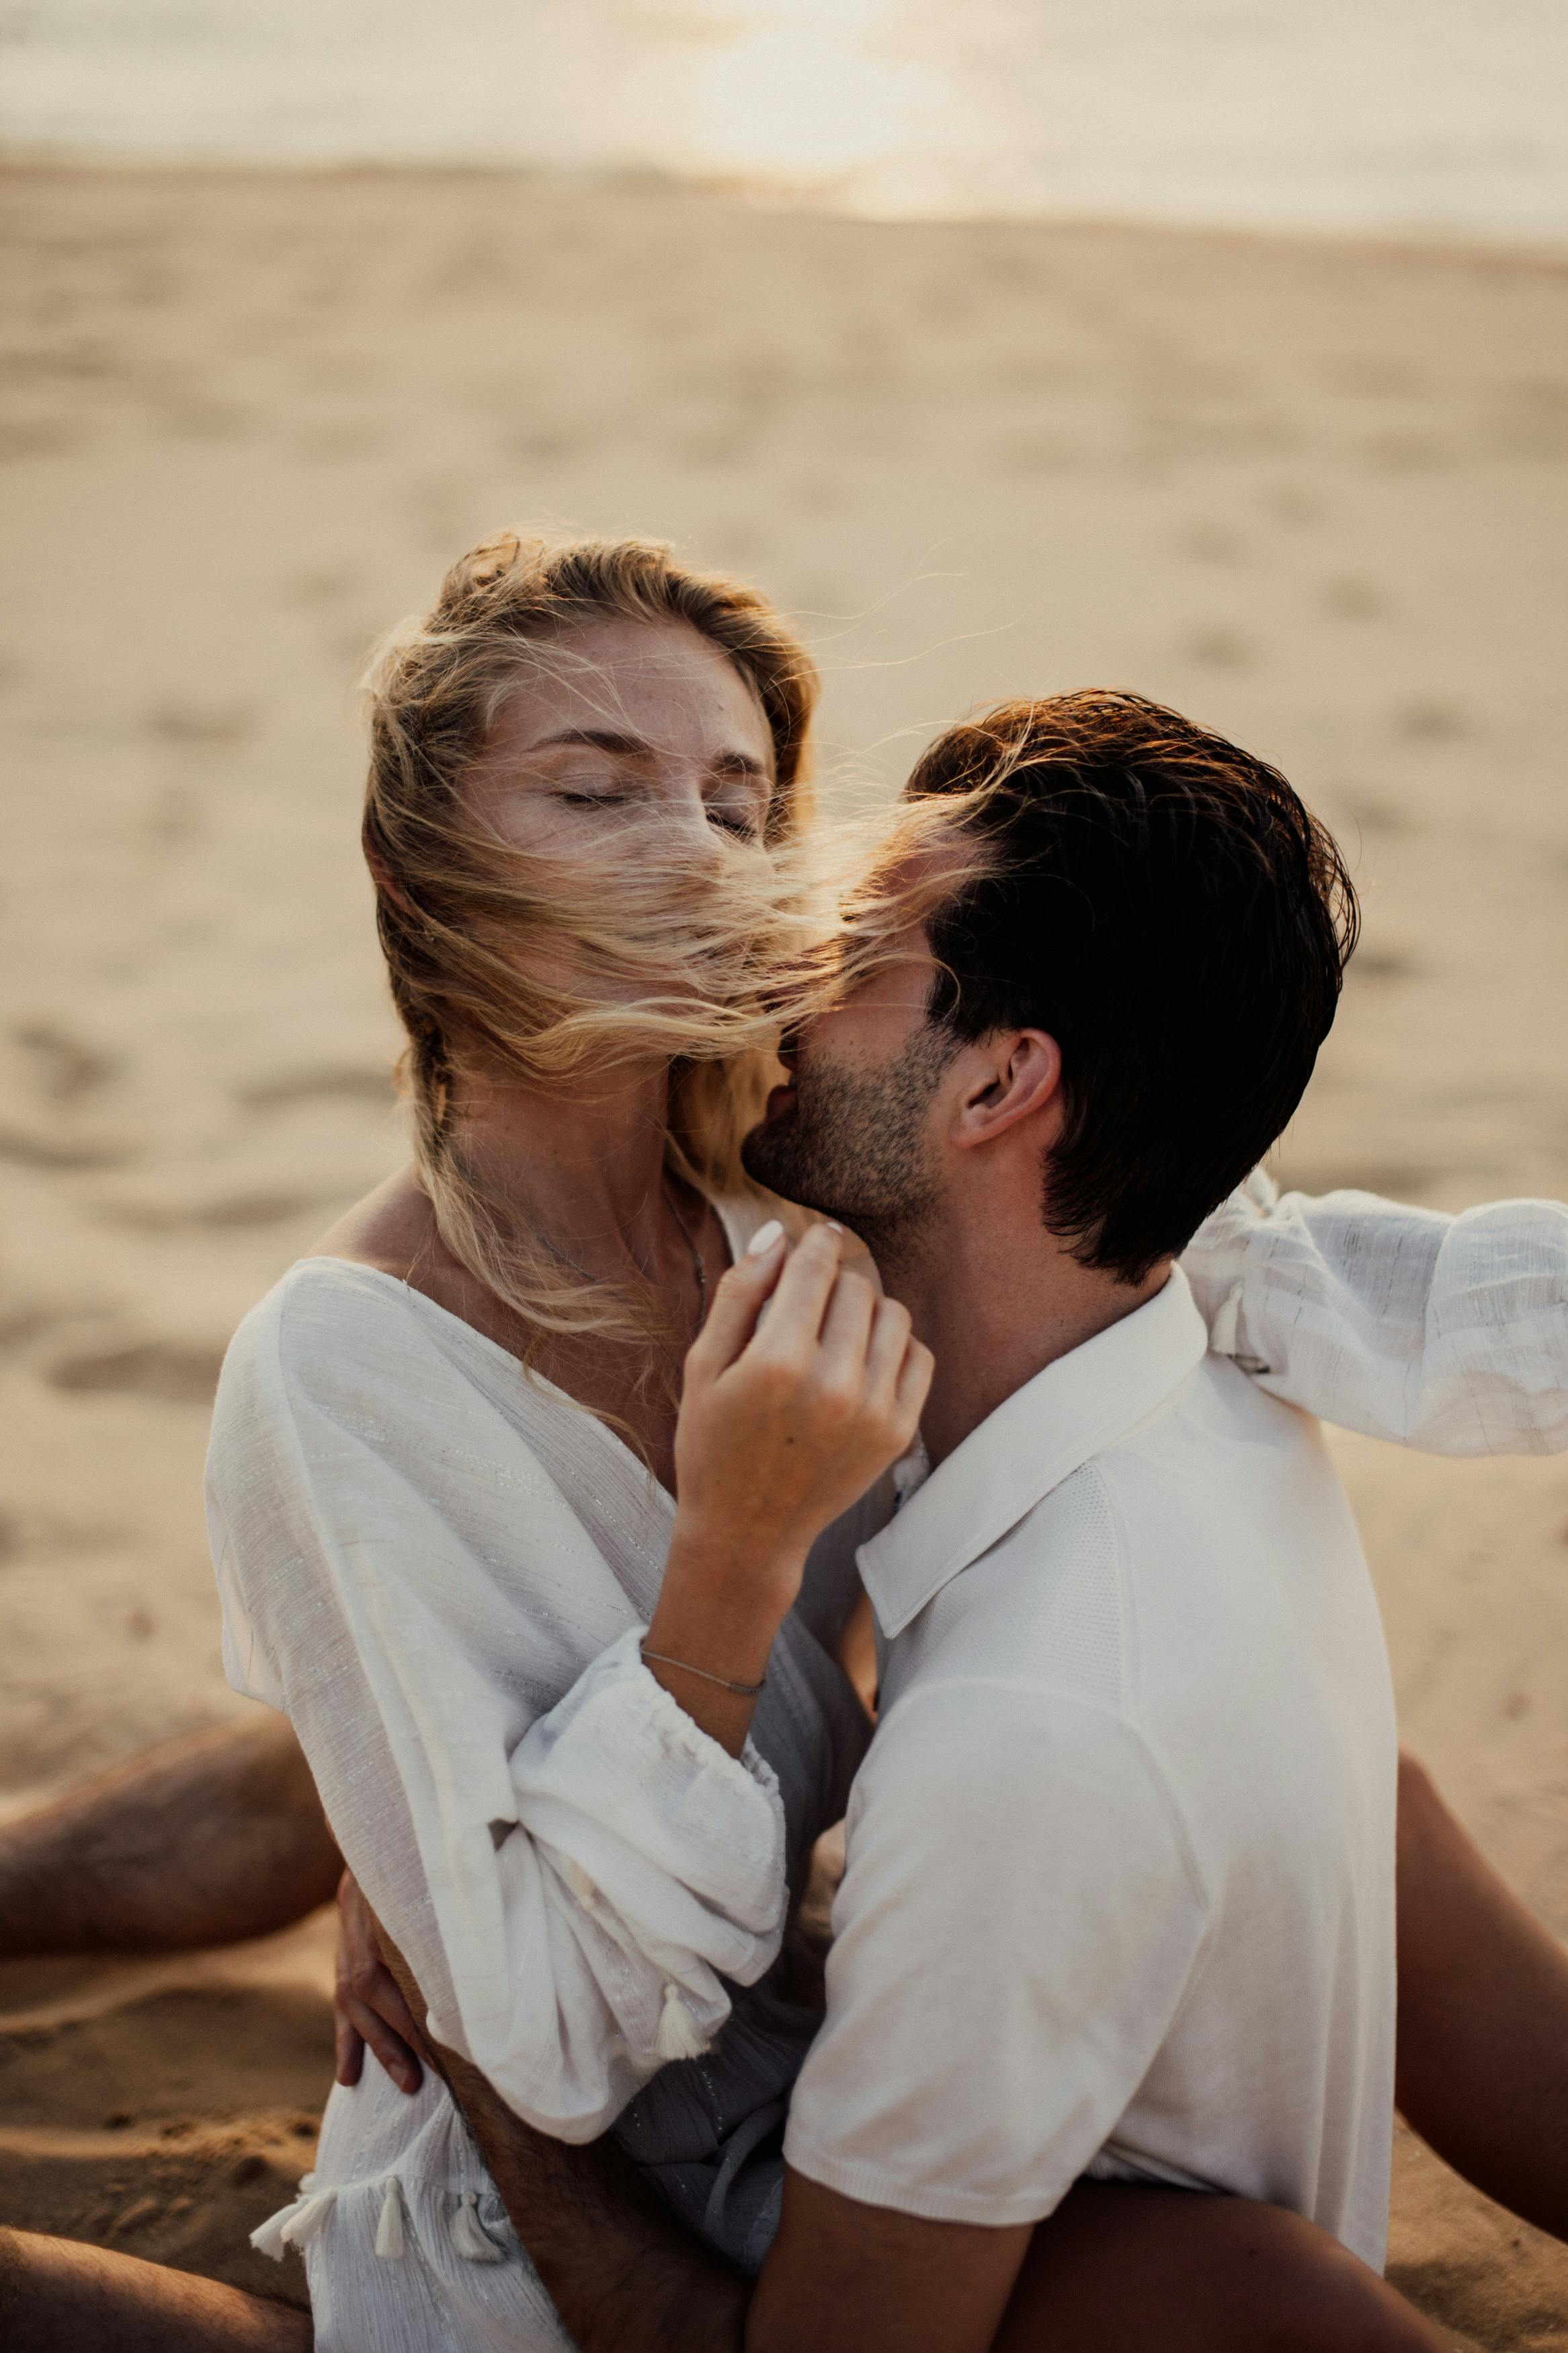 A happy couple sitting on the beach | Source: Pexels